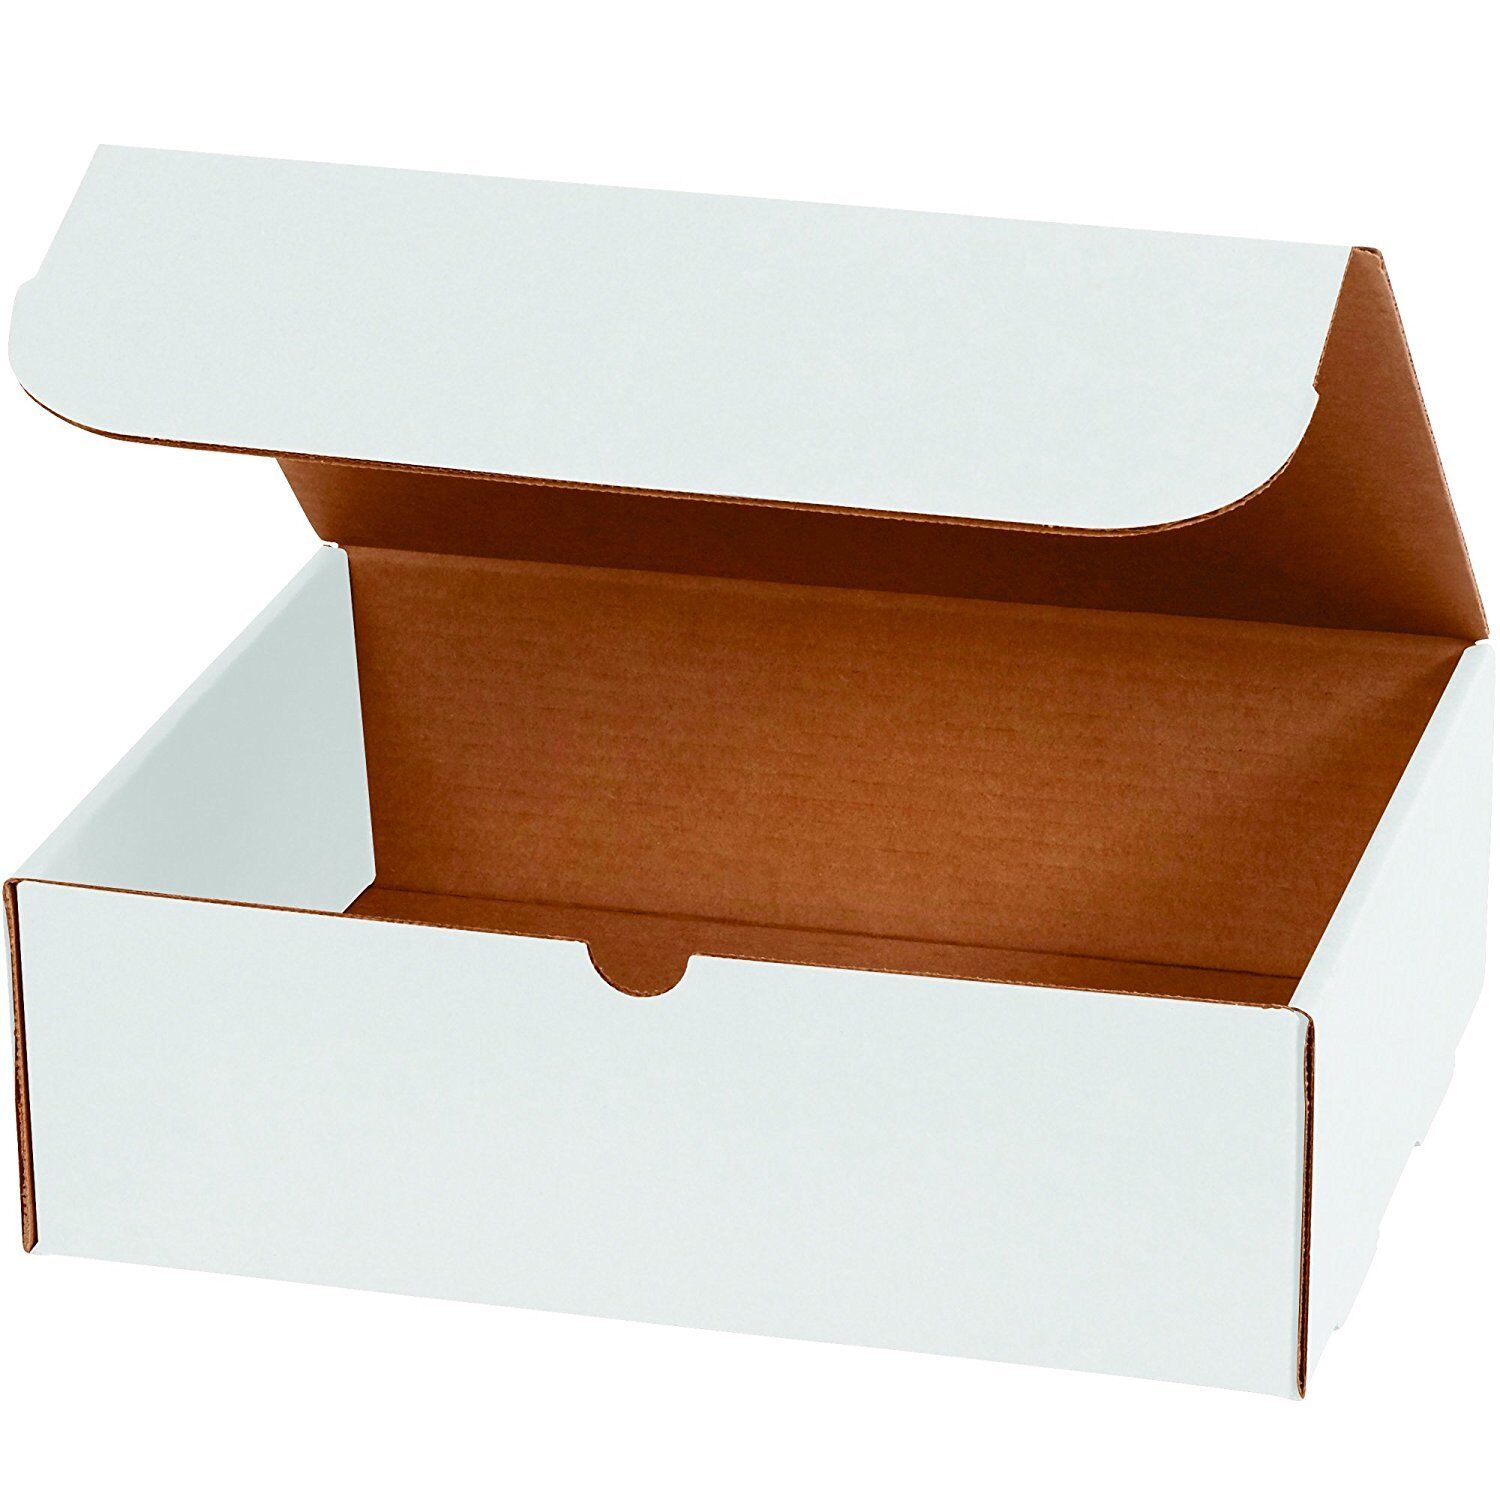 7x5x2 White Corrugated Shipping Mailers Packing Box Boxes Folding 50 100 To 1000